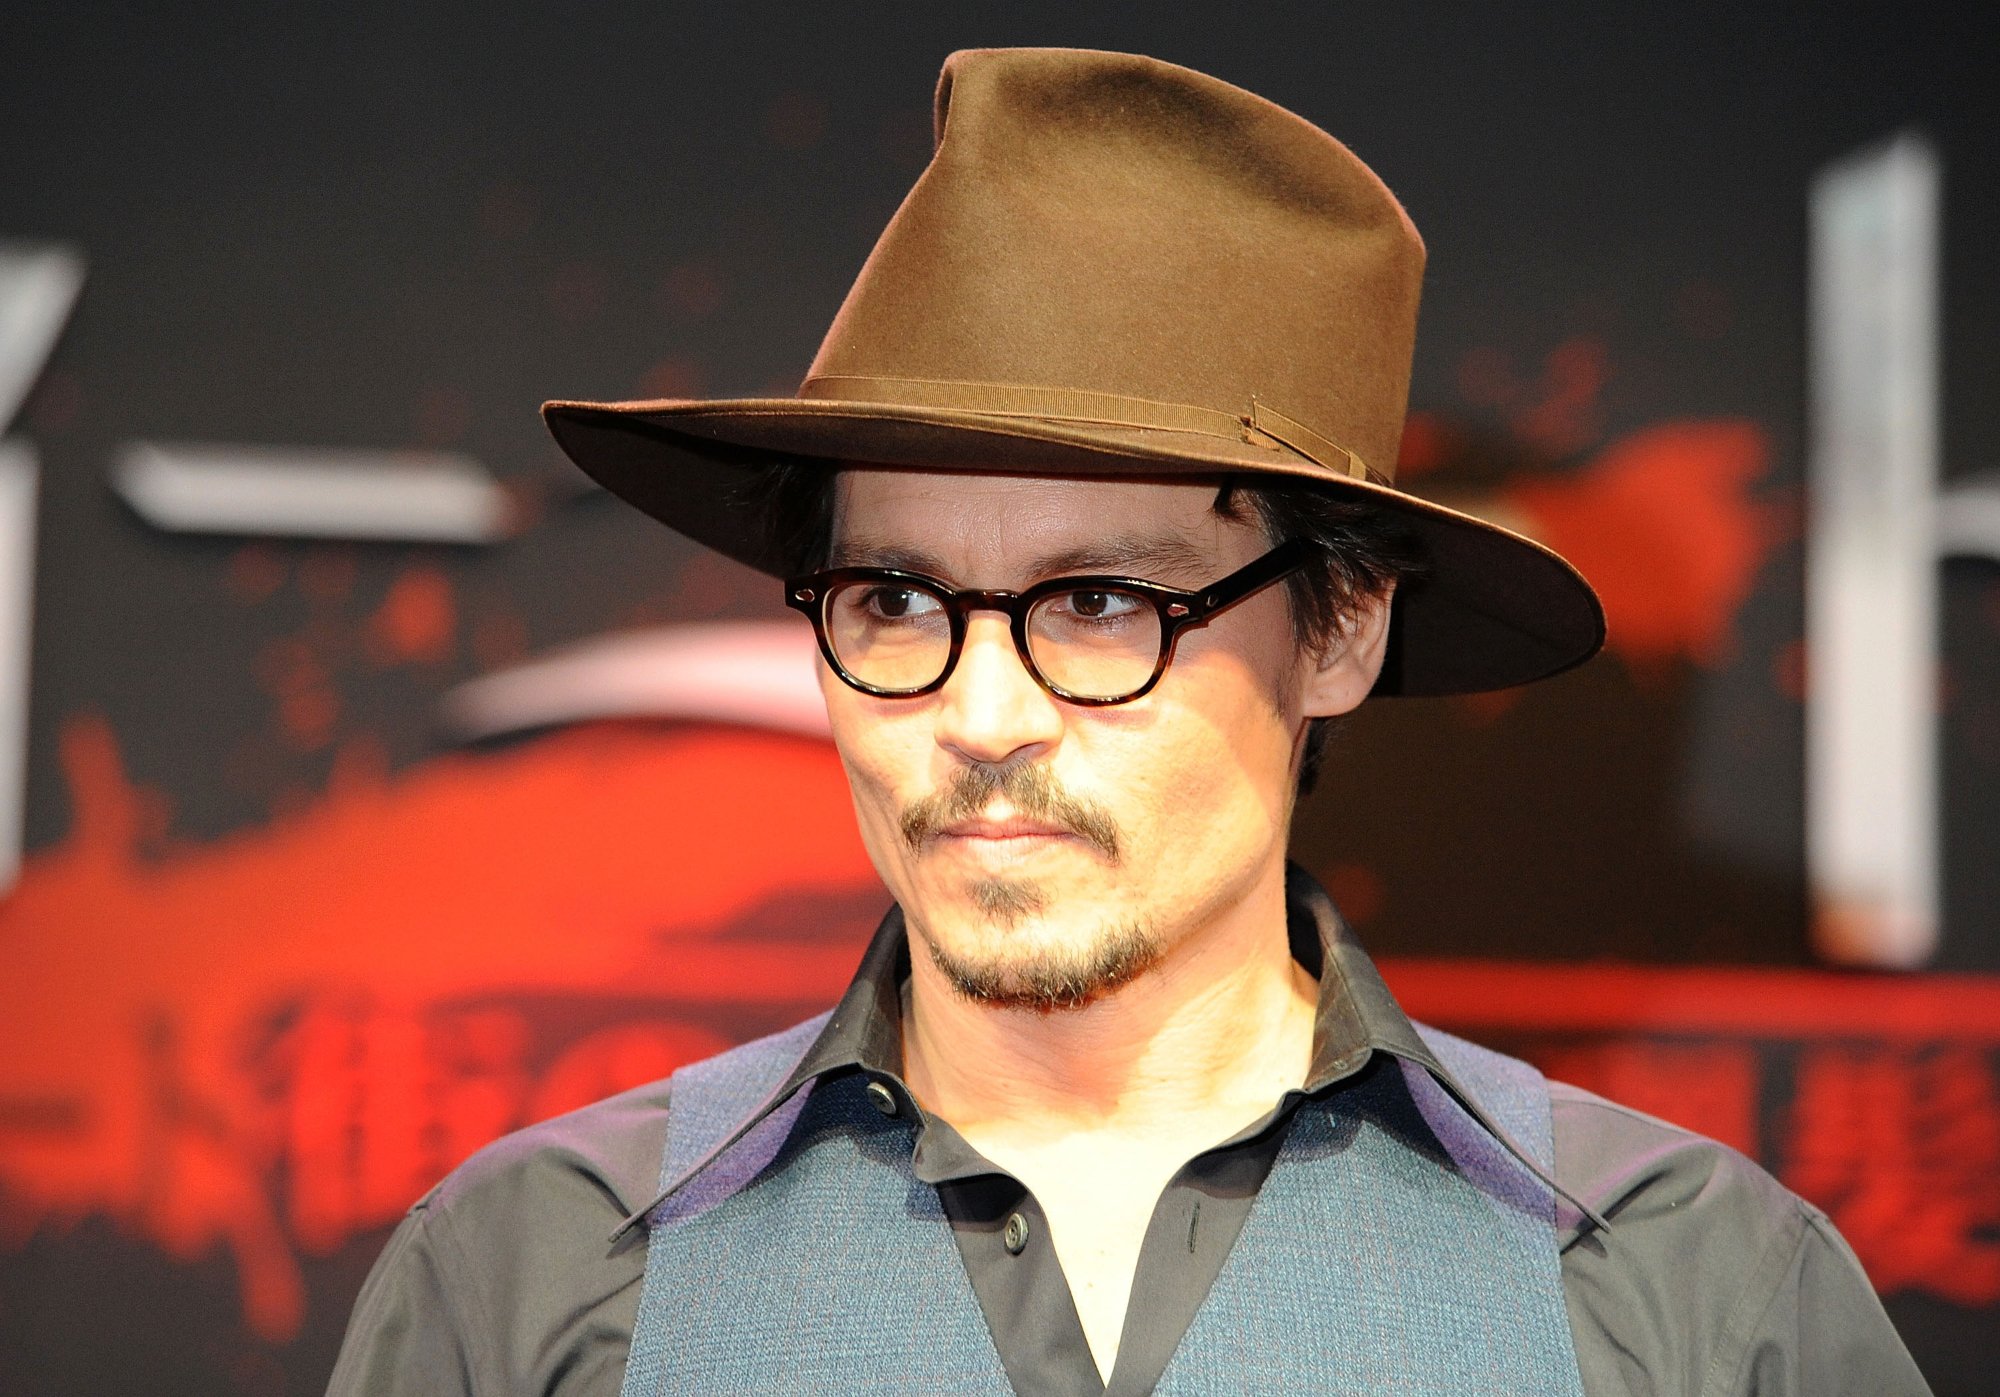 'Sweeney Todd' actor Johnny Depp wearing a hat, glasses, and a vest